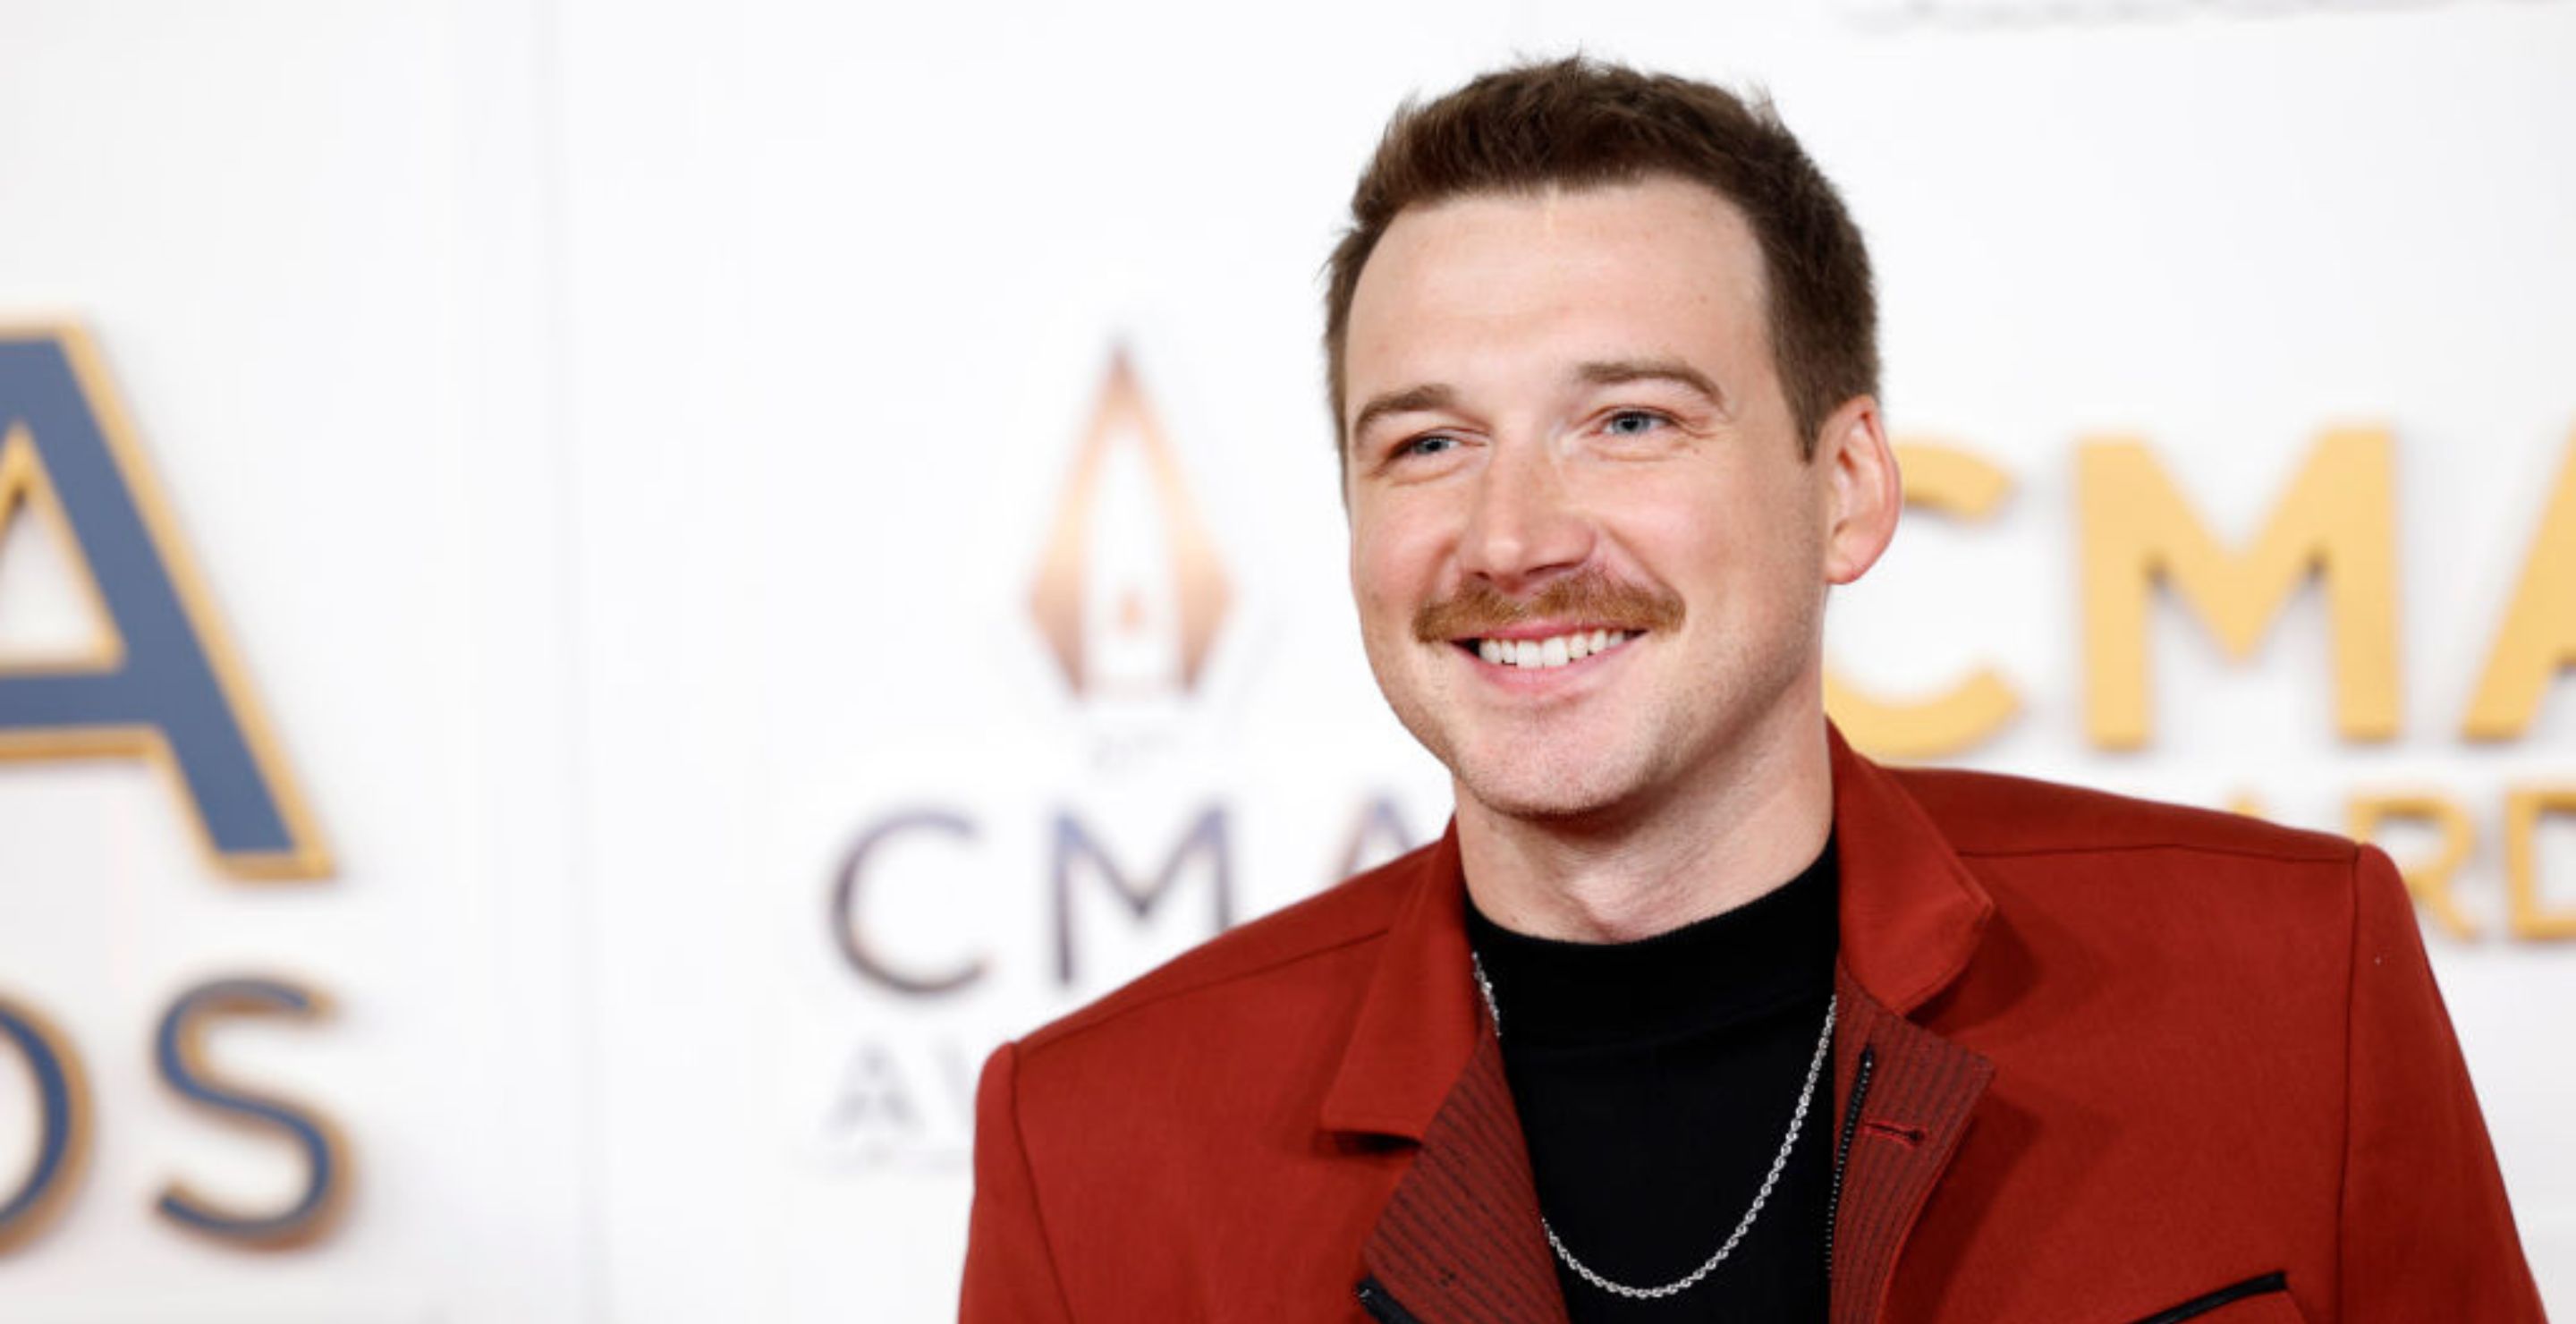 Morgan Wallen Fans Are Blasting The ACM Awards For Snubbing The Artist